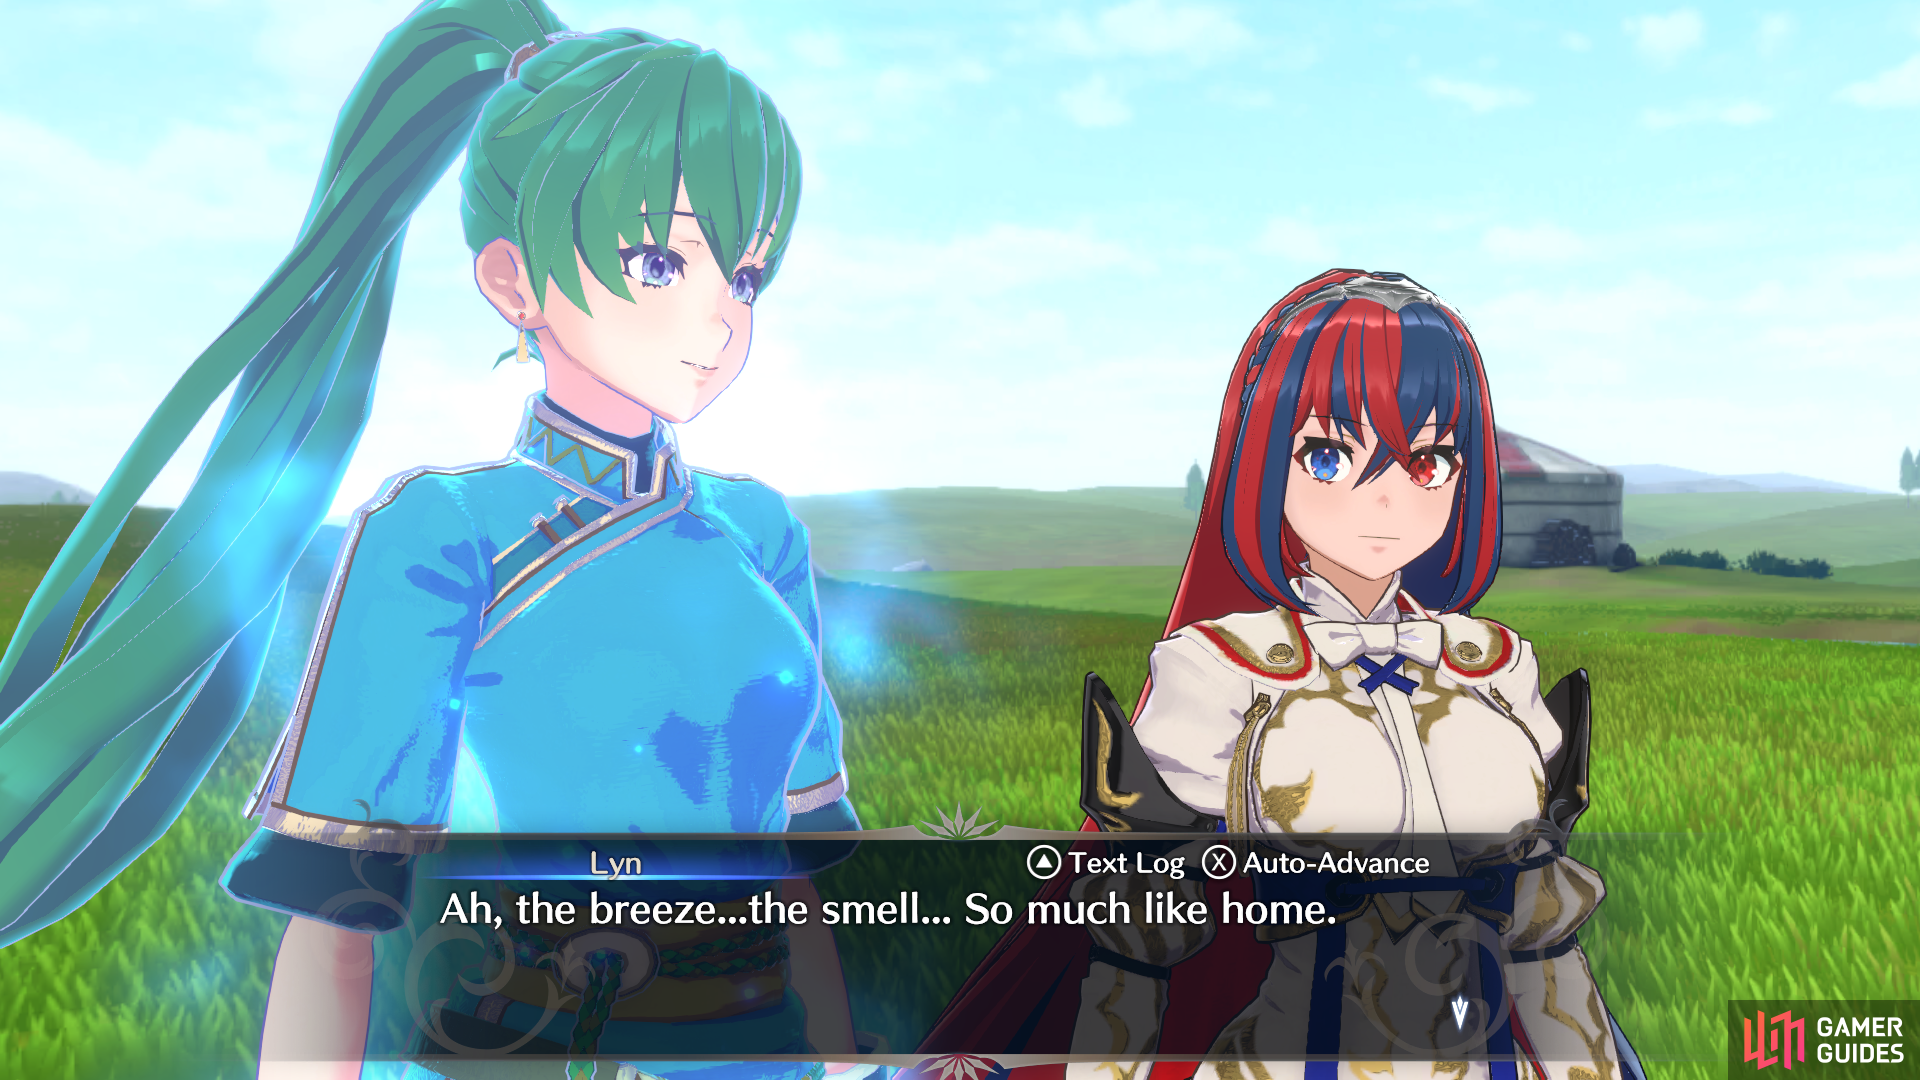 Lyn and Alear speaking before their battle.